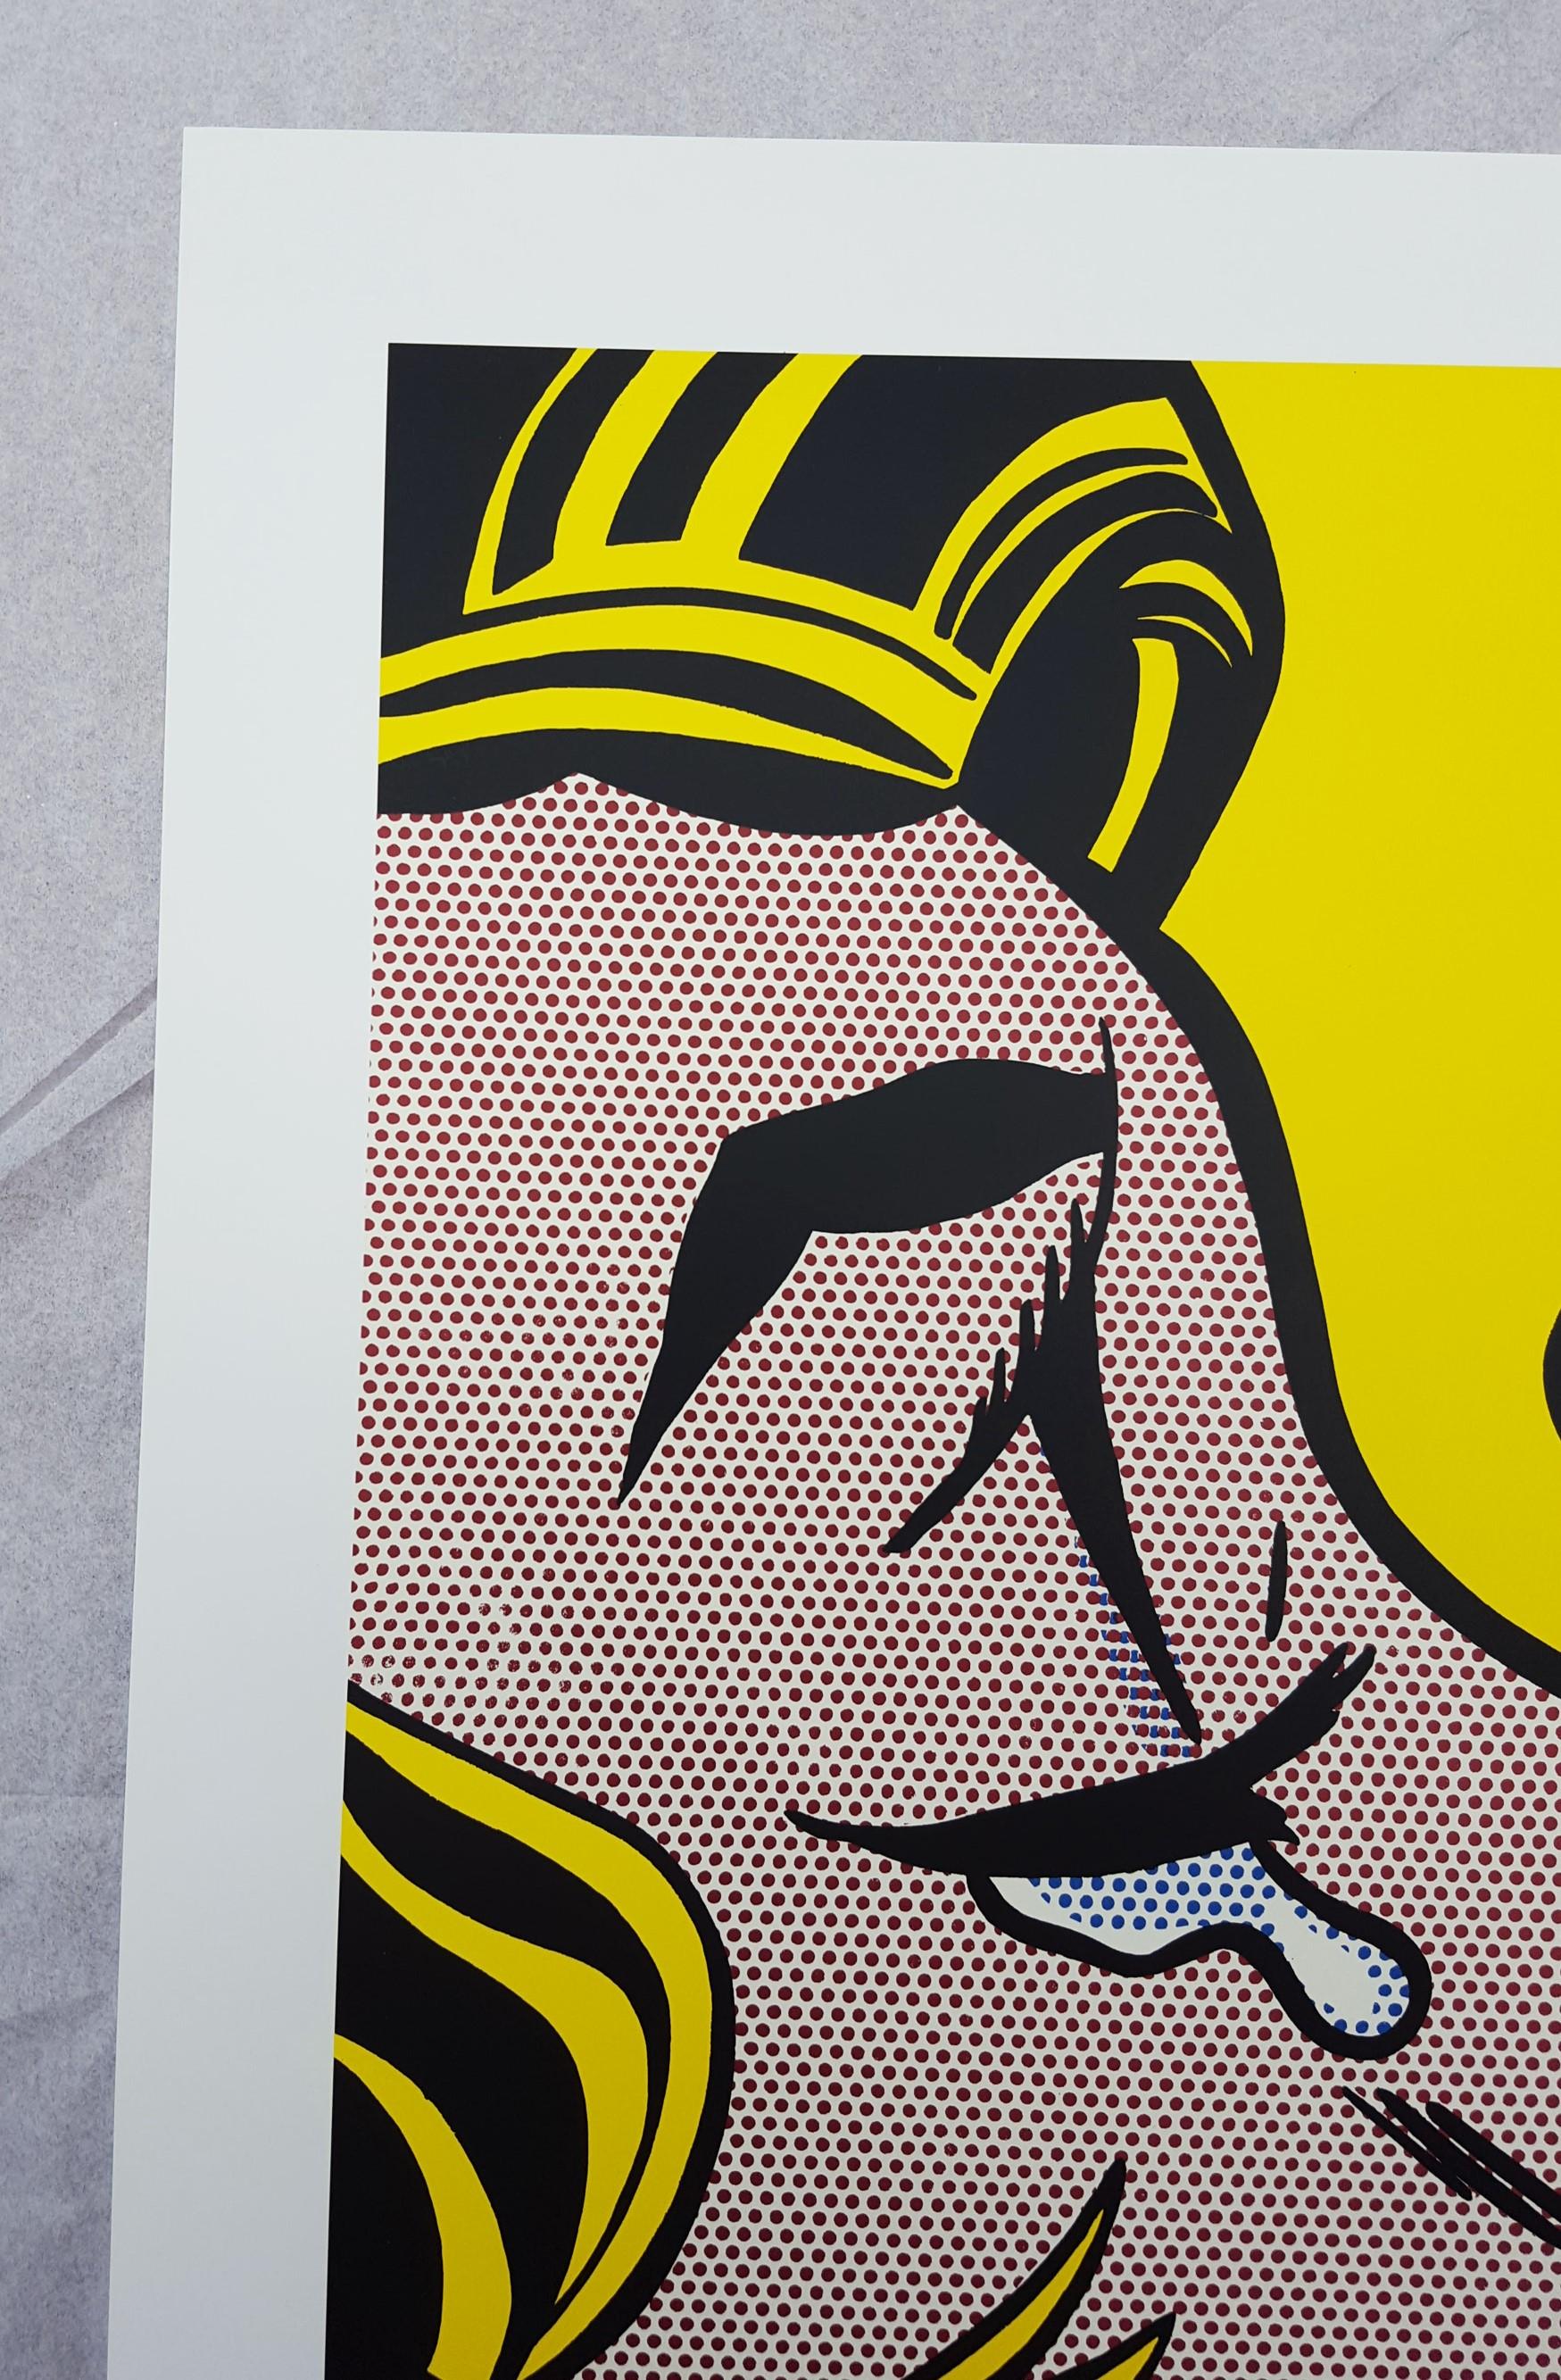 Yale University Art Gallery (Thinking of Him) Poster - Beige Figurative Print by (after) Roy Lichtenstein